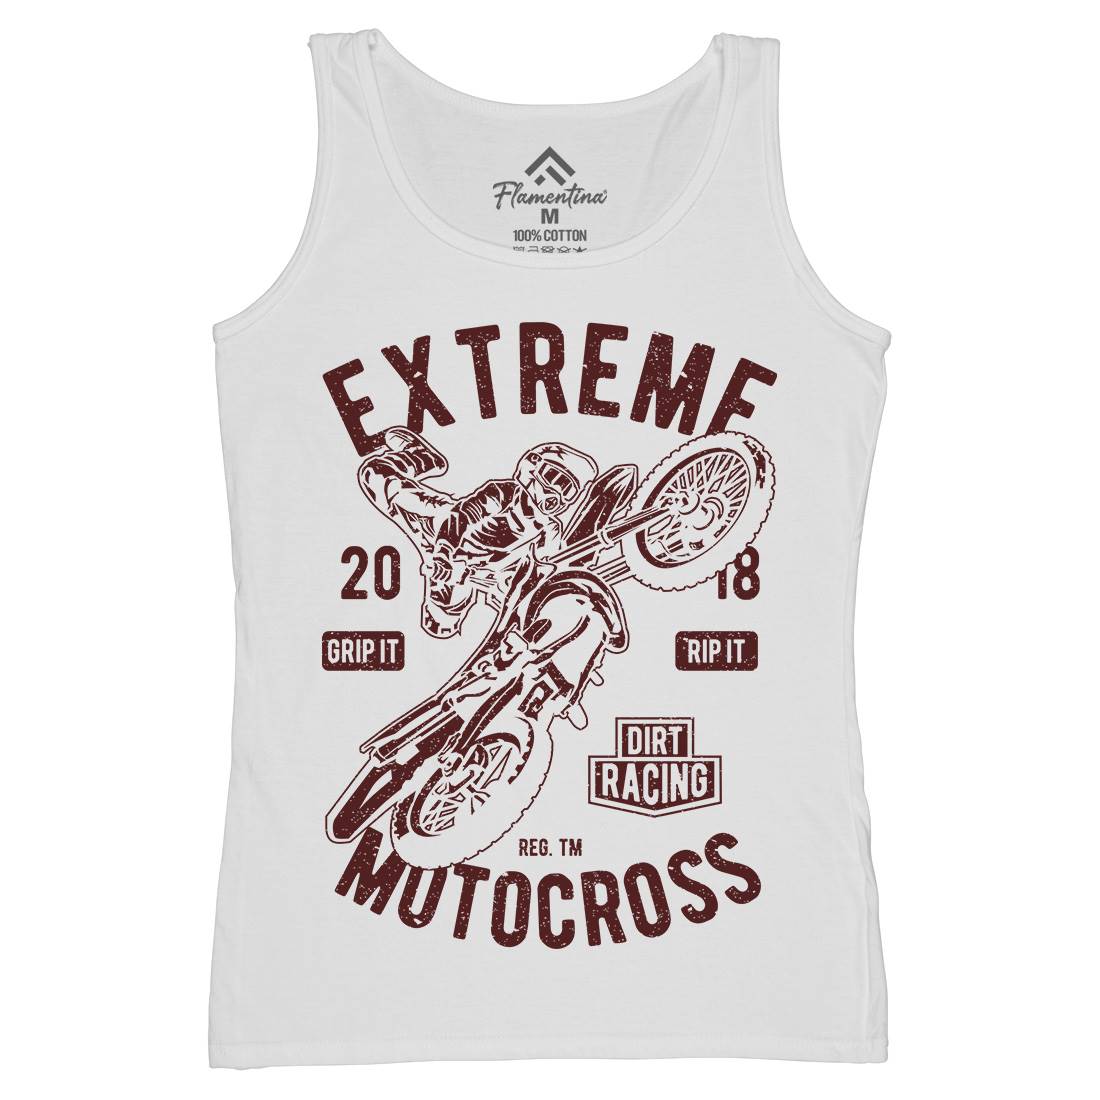 Extreme Motocross Womens Organic Tank Top Vest Motorcycles A651